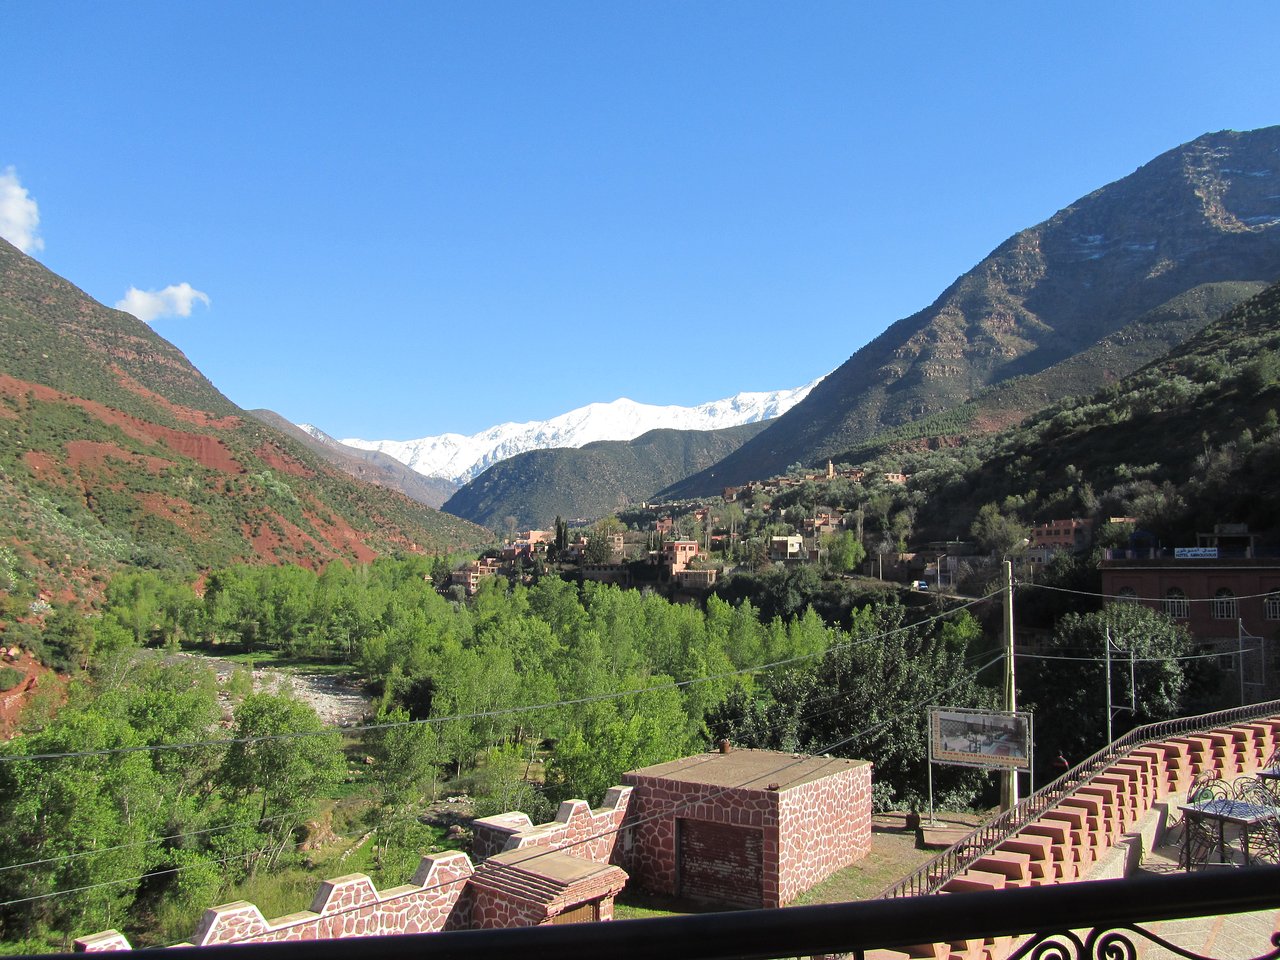 Half Day Tour From Marrakech to the Atlas Mountains & Ourika Valley